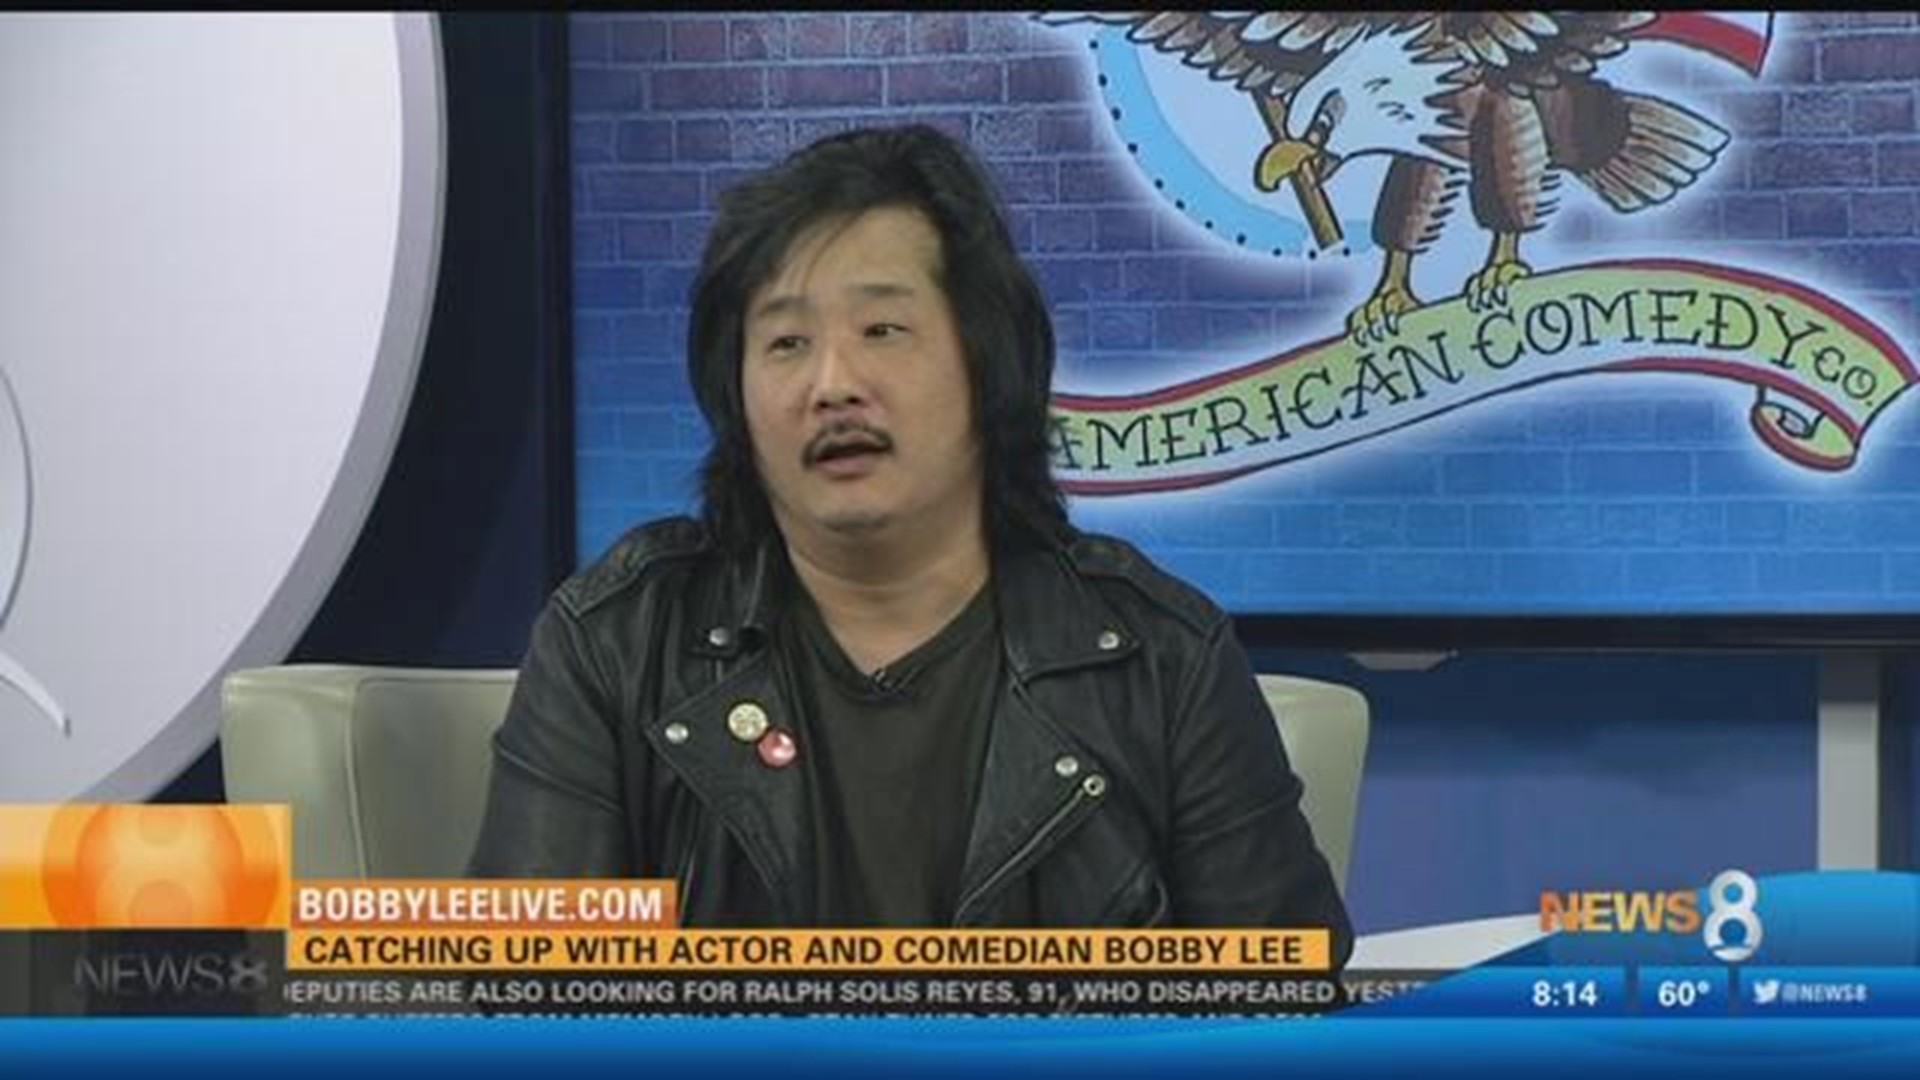 Mad TV star Bobby Lee is coming to the American Comedy Co. 